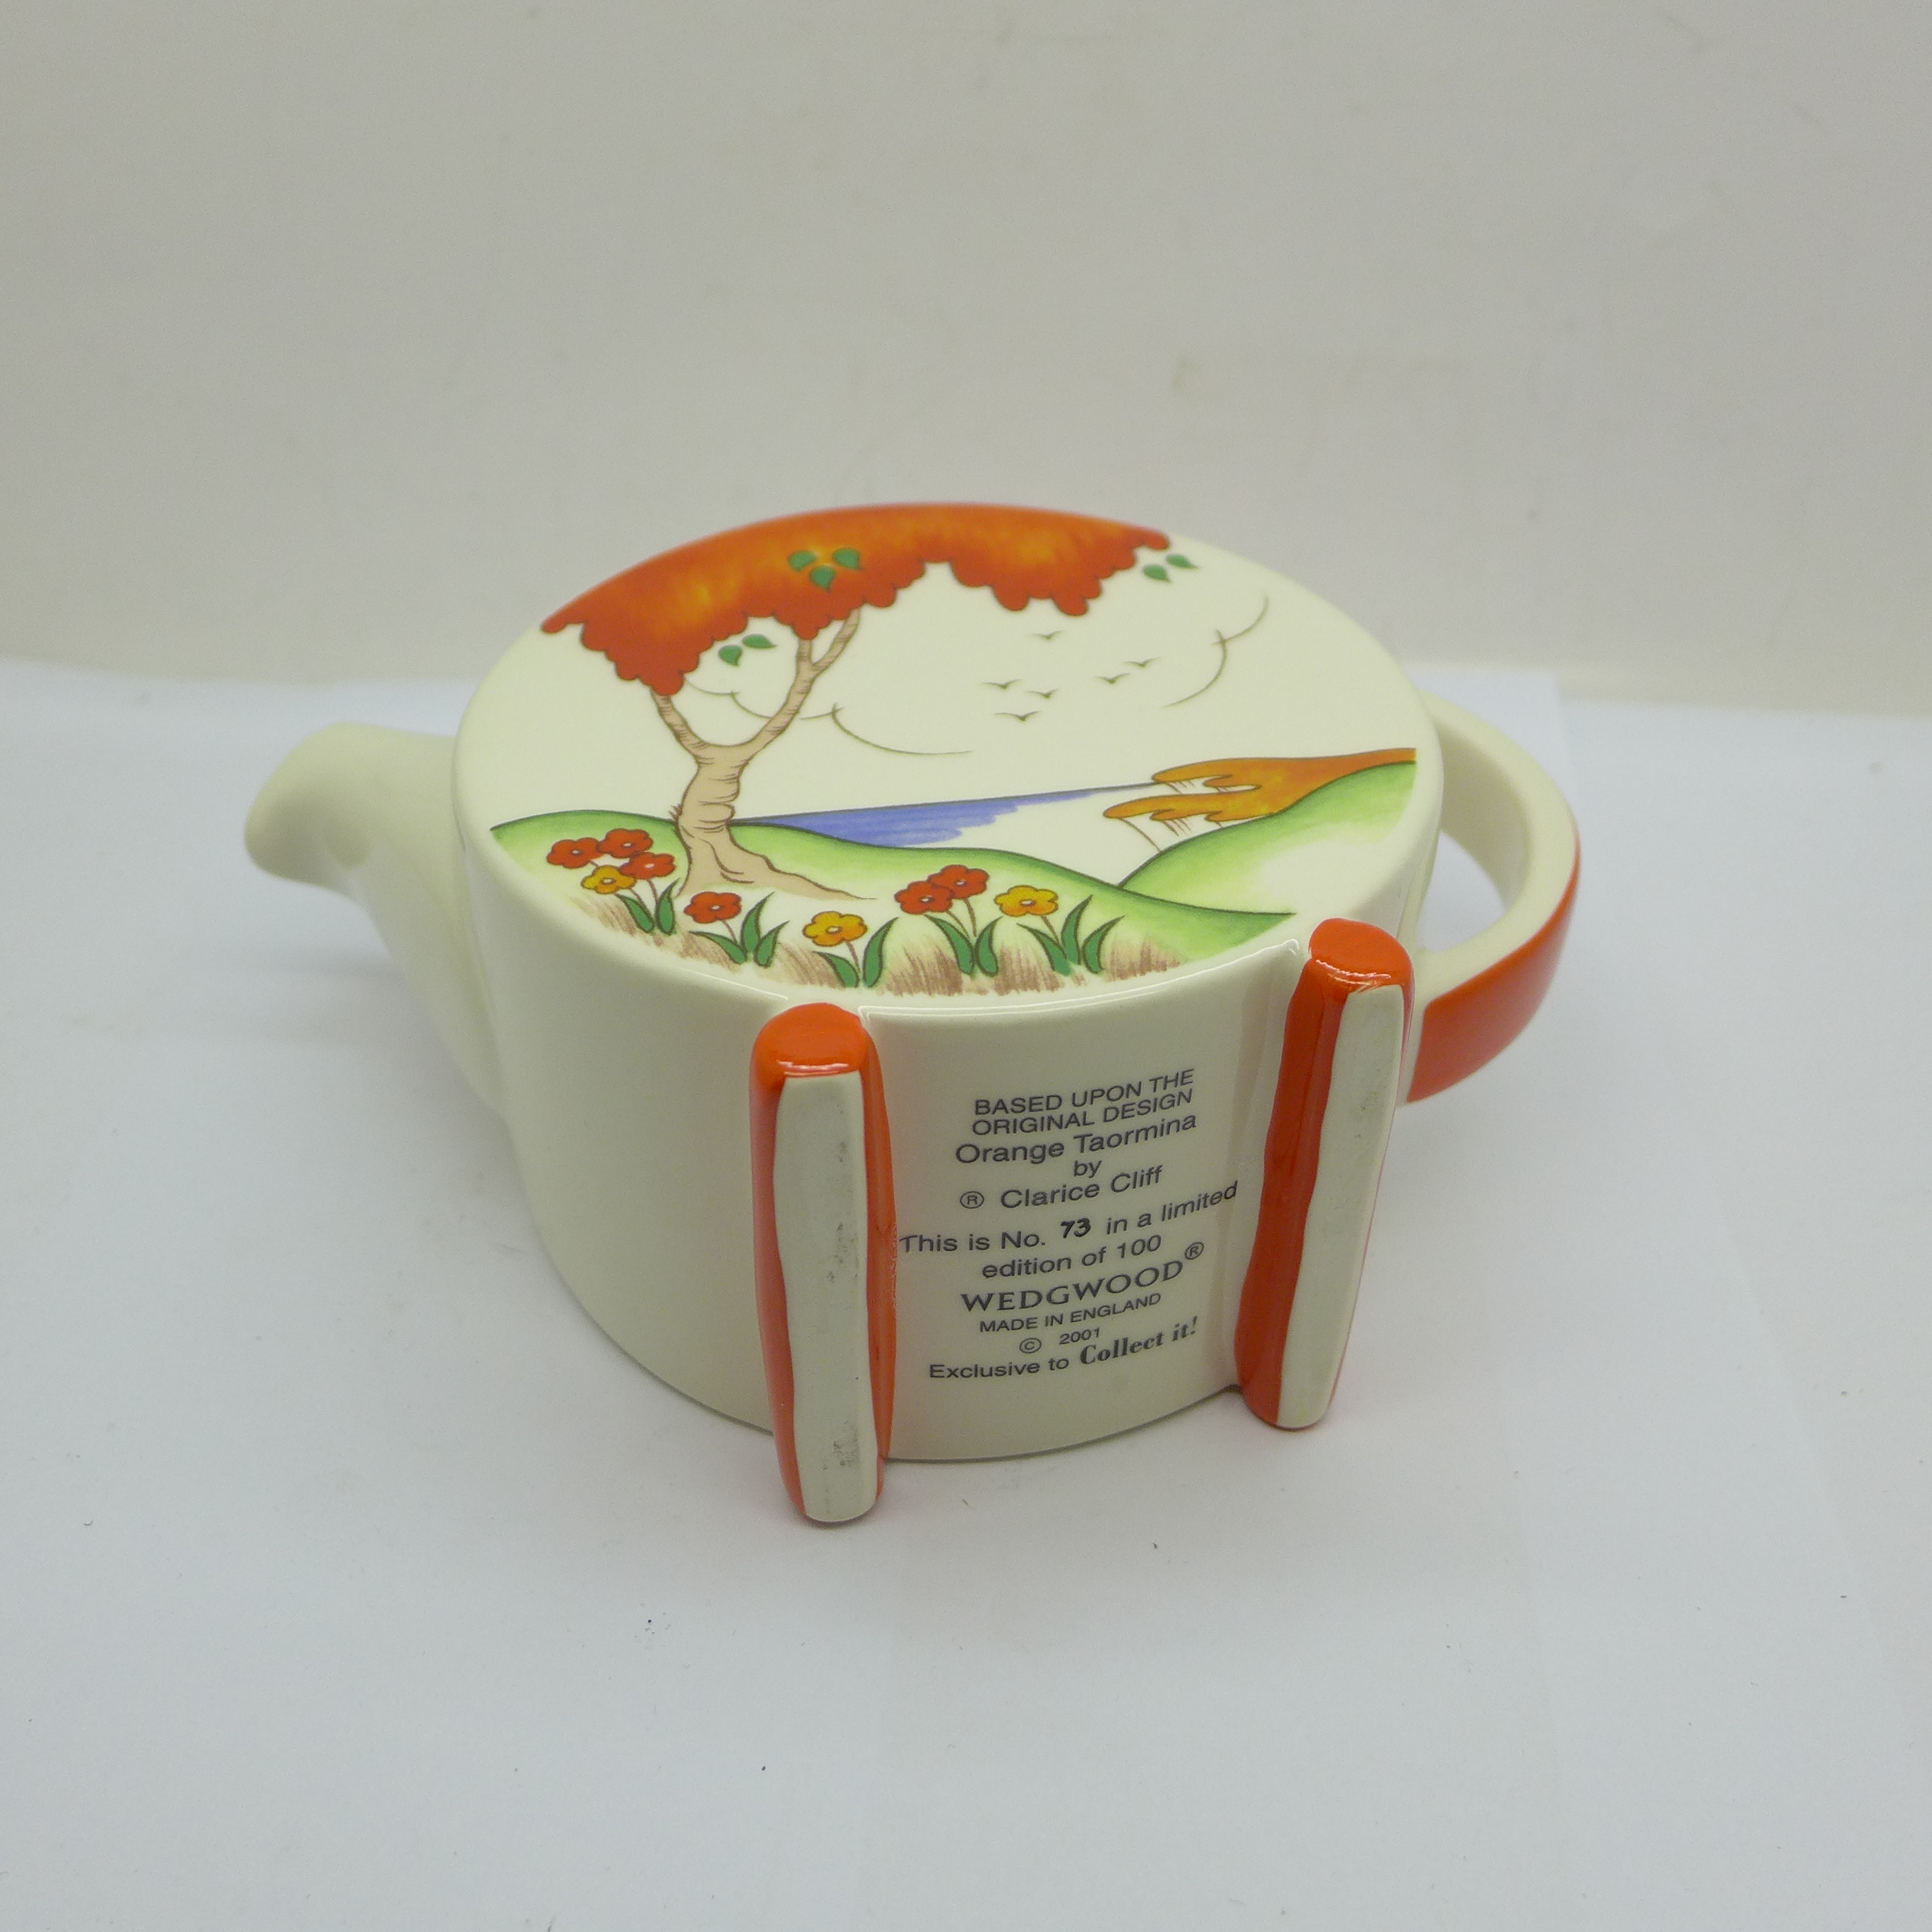 A Wedgwood limited edition Clarice Cliff teapot in the Orange Taormina design, number 73 of 100, H: - Image 3 of 3